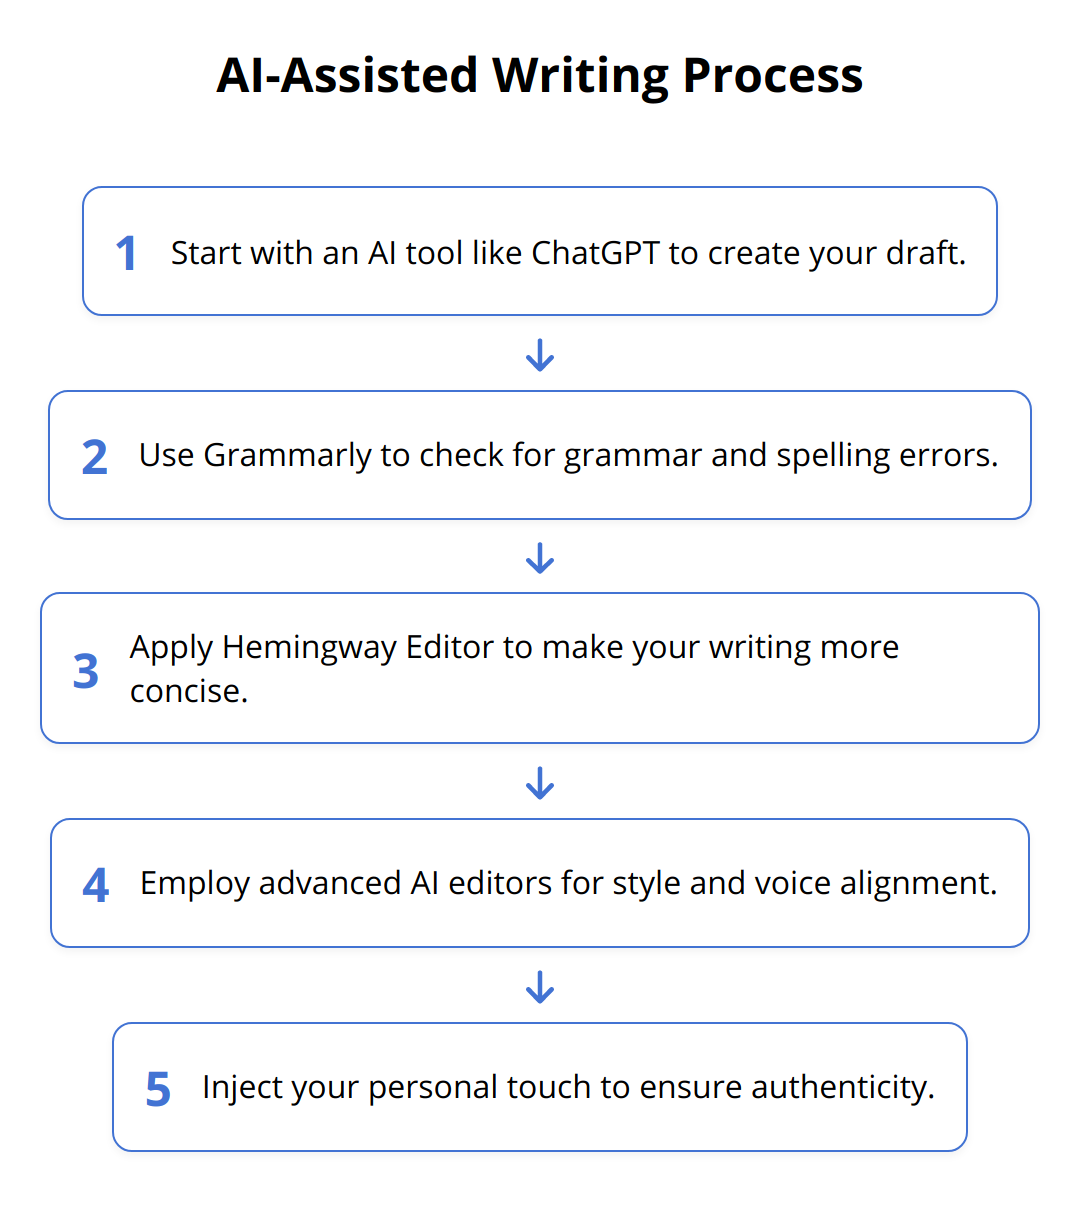 Flow Chart - AI-Assisted Writing Process